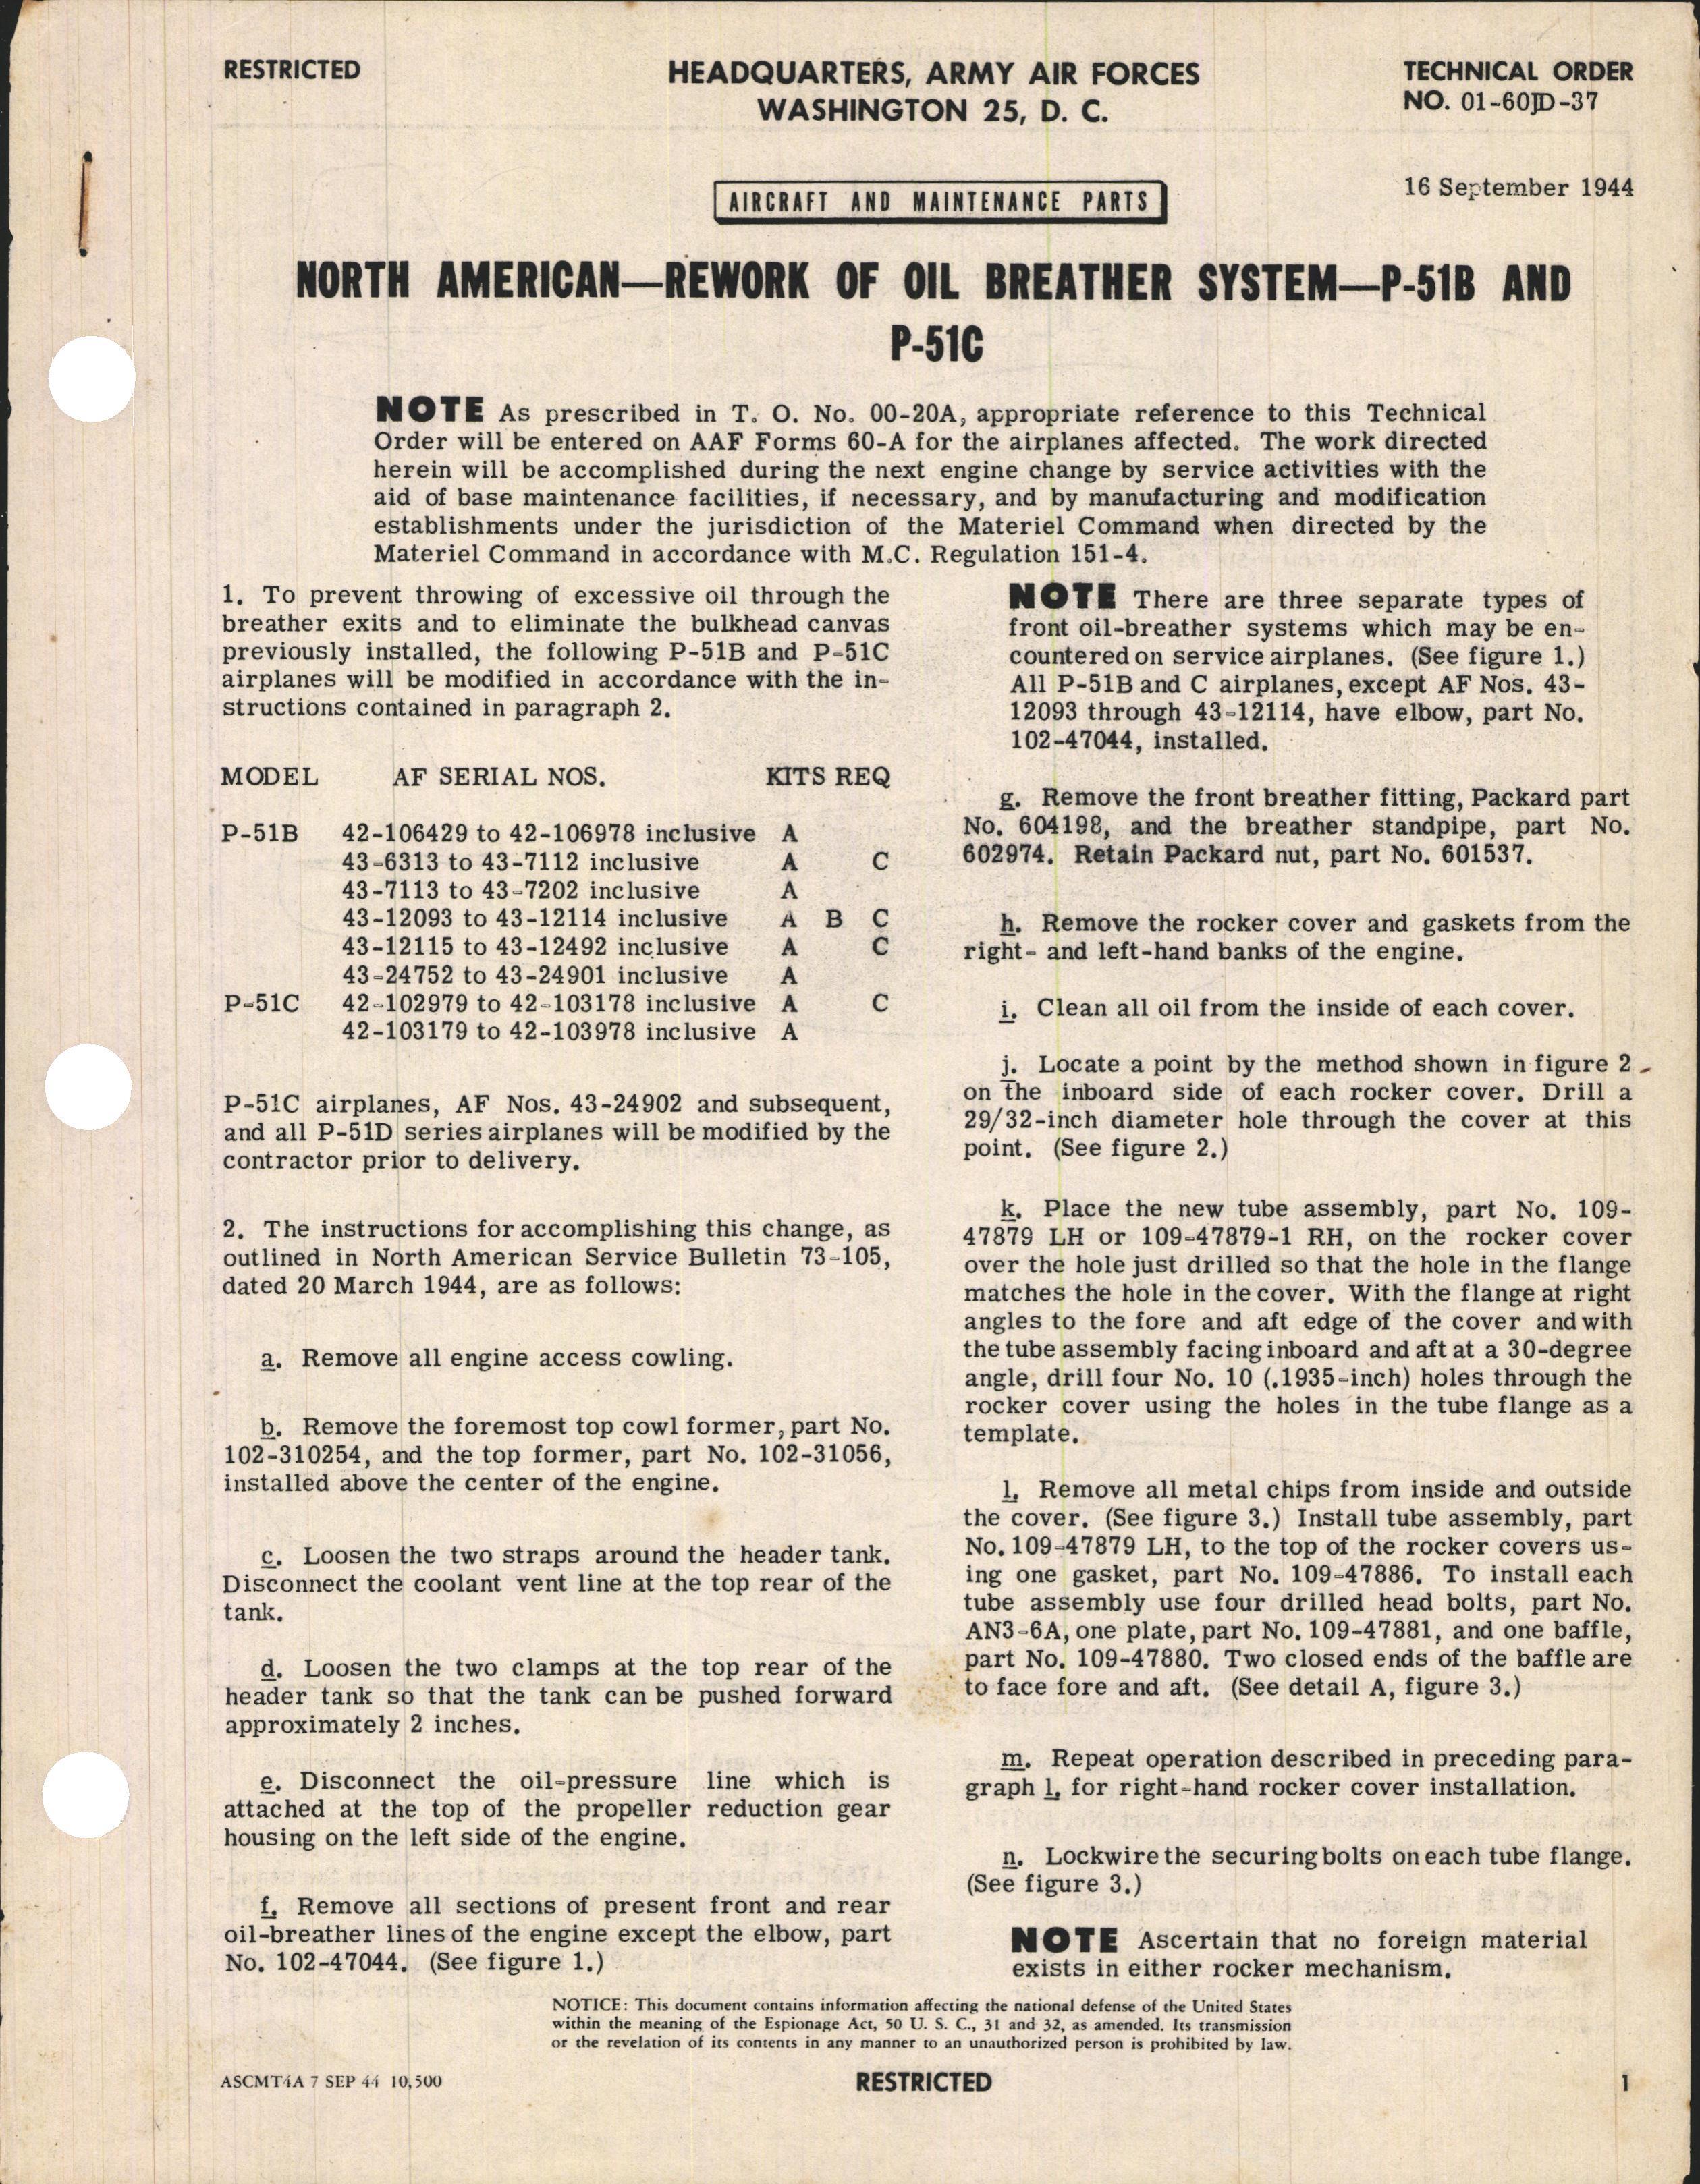 Sample page 1 from AirCorps Library document: Rework of Oil Breather System for P-51B and P-51C